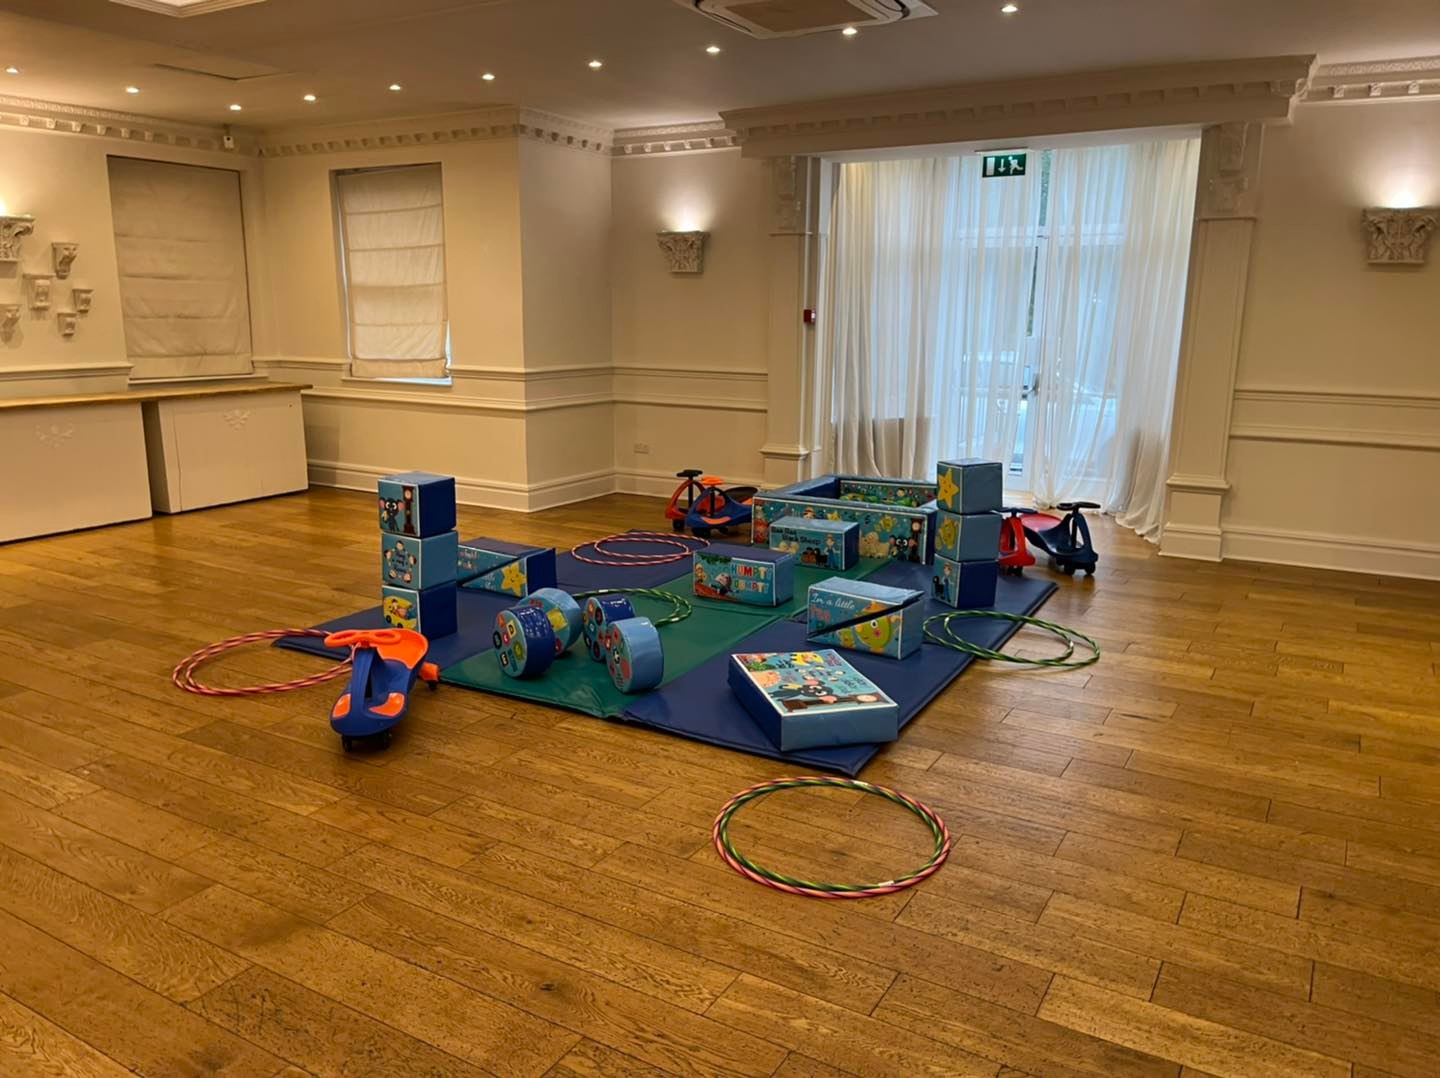 This image shows a nursery rhymes theme soft play set up supplied by SJ's Leisure in Wigan